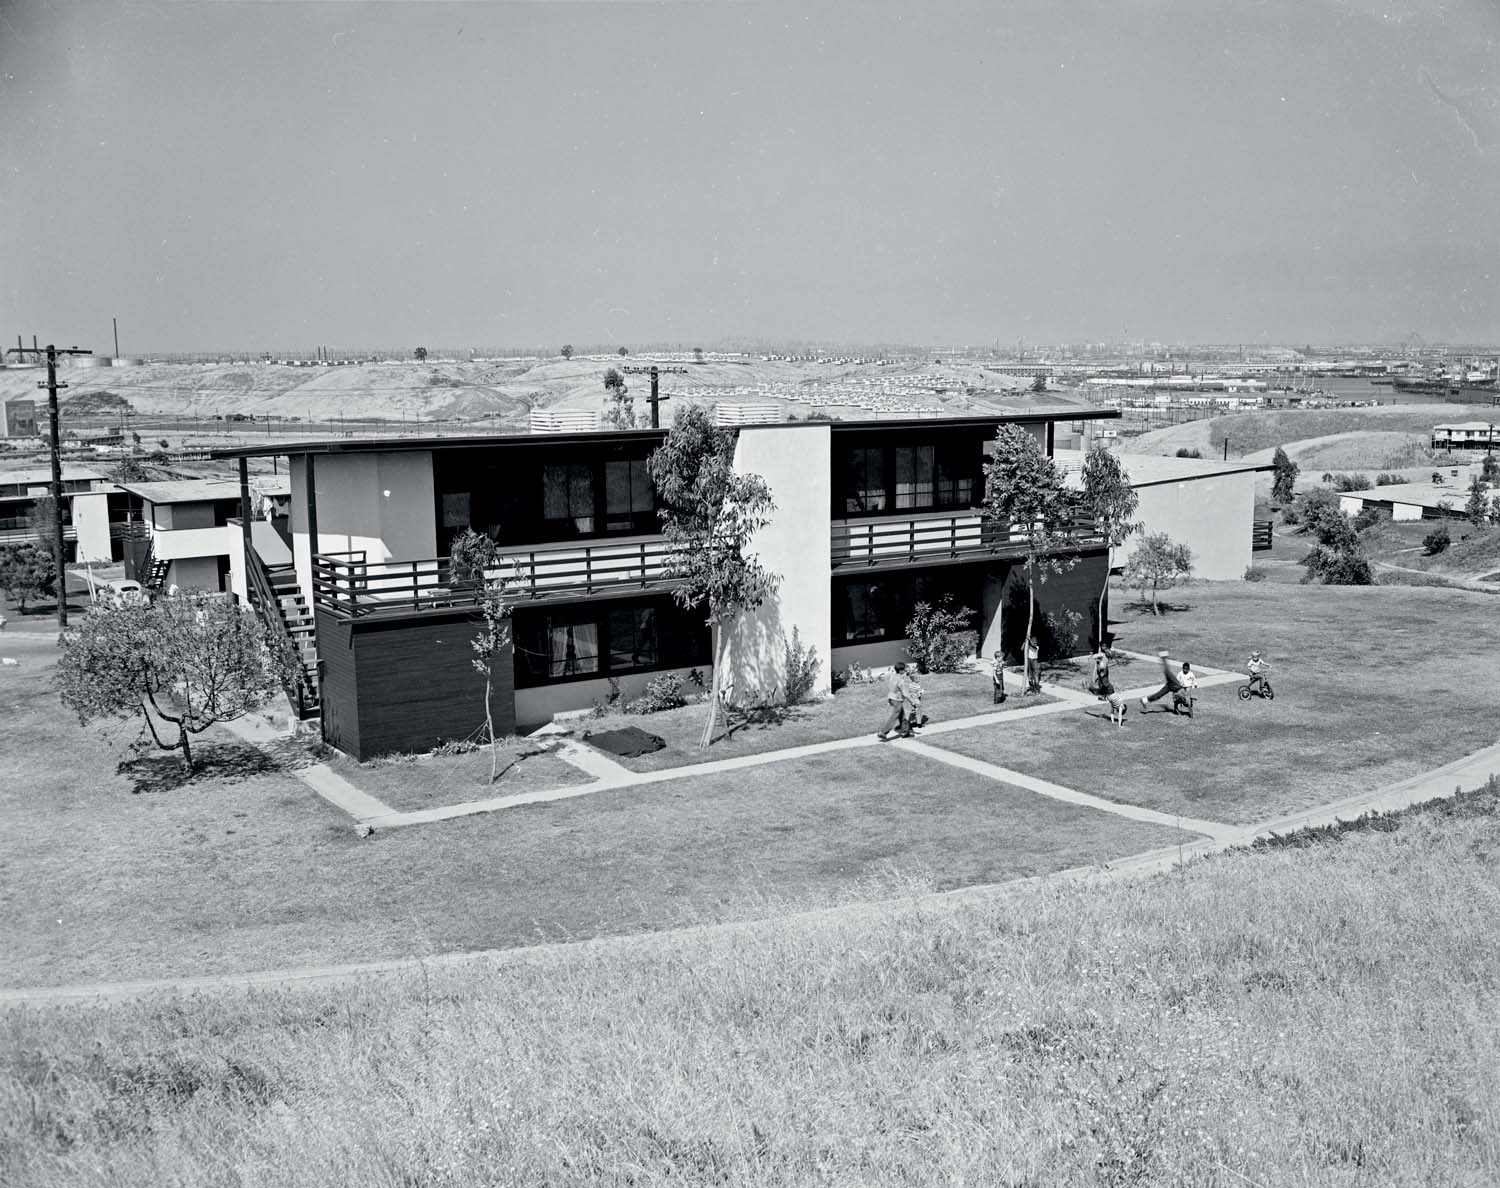 Channel Heights housing project, Richard Neutra, San Pedro, CA, USA, 1942. | © J. Paul Getty Trust - Leonard Nadel photograph for the Housing Authority of the City of Los Angeles